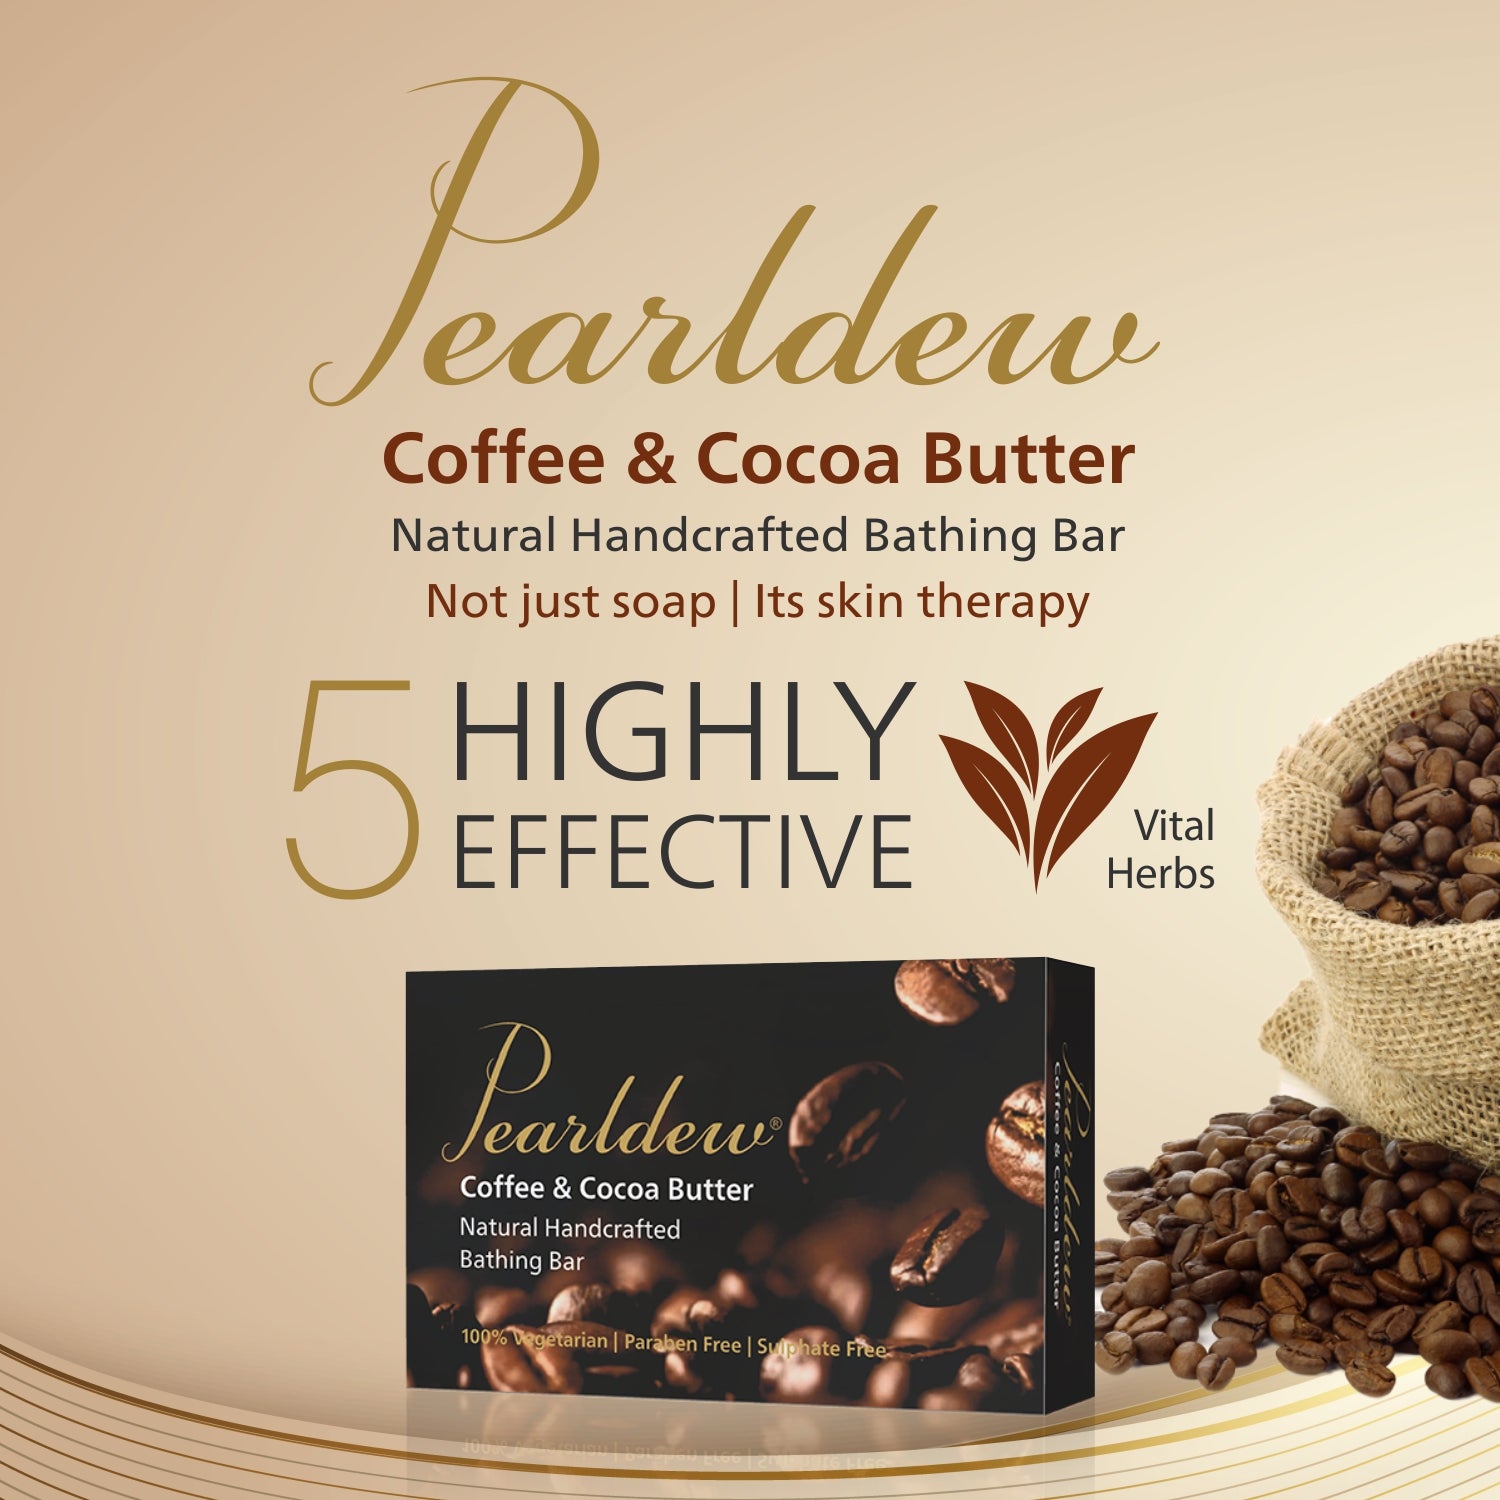 Pearldew Coffee & Cocoa Butter Natural Handcrafted Bathing Bar (75 gm)